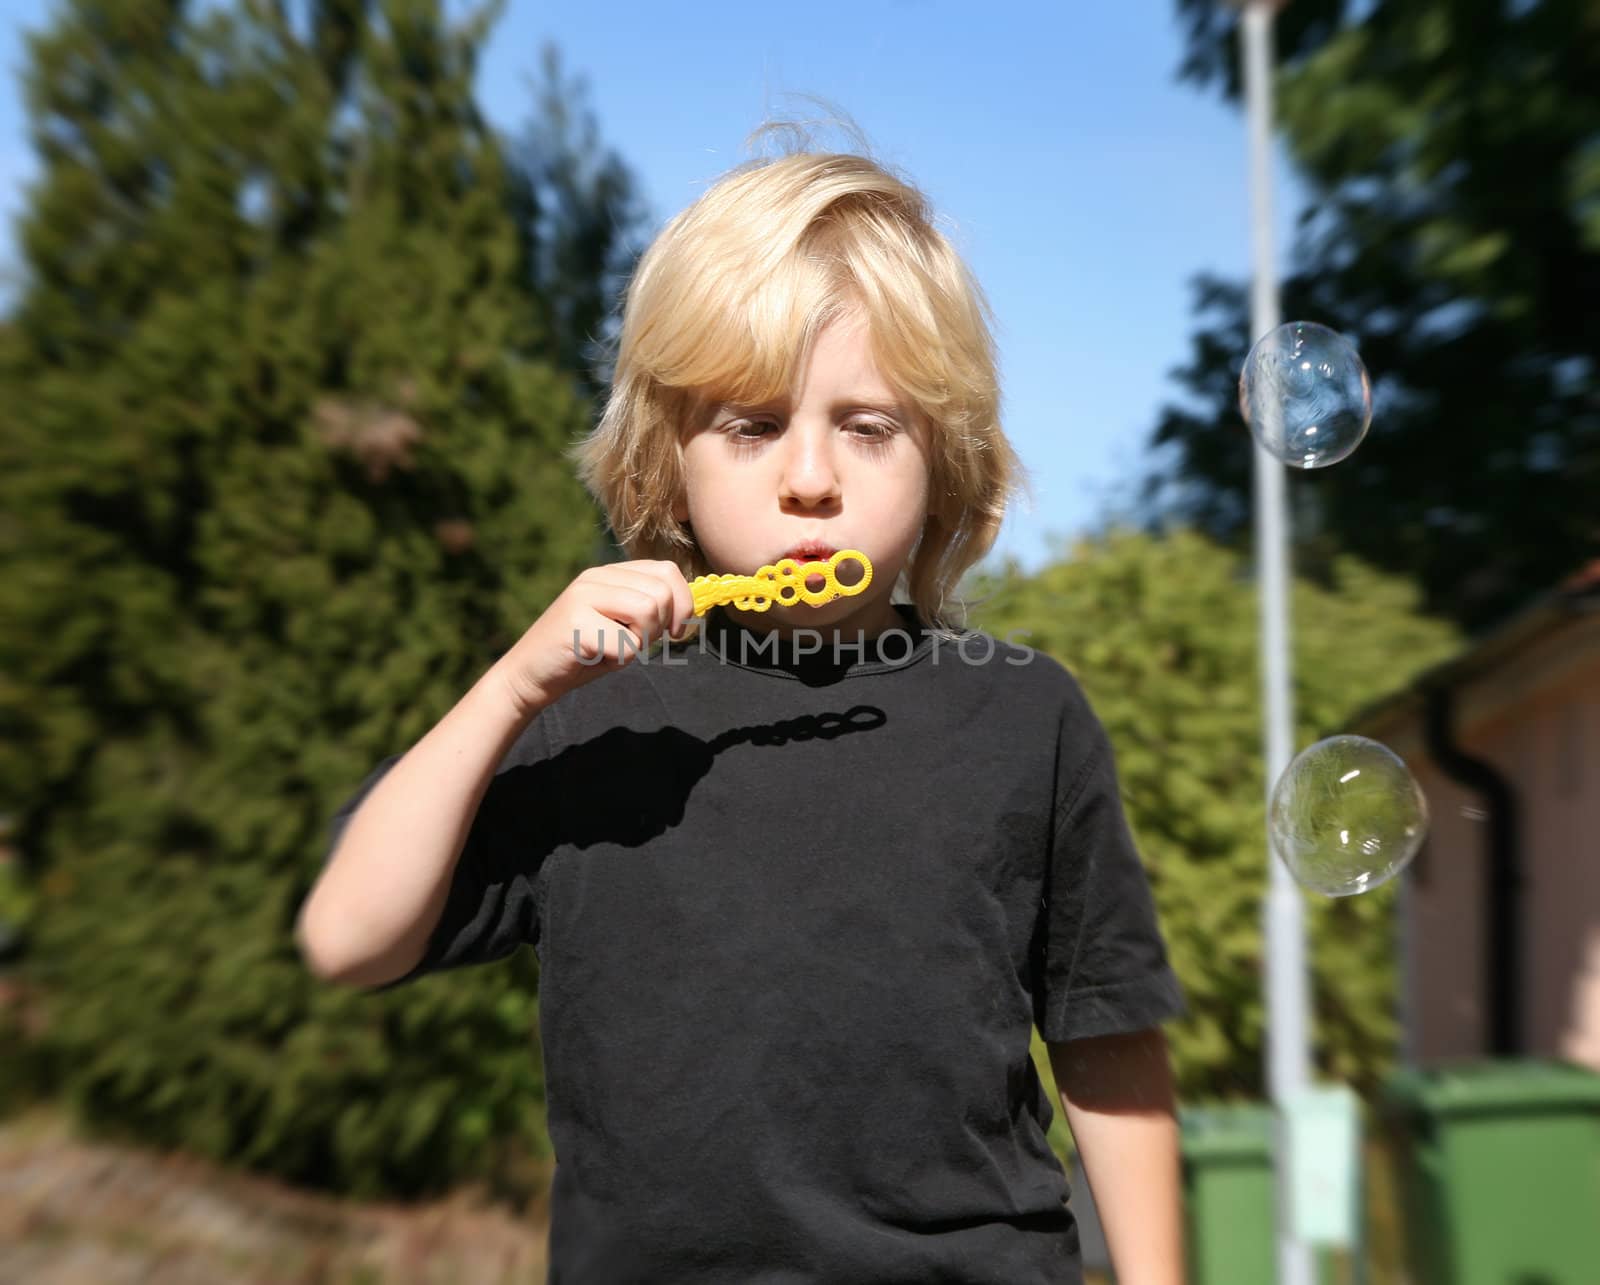 young boy blowing soap bubbles outdoors